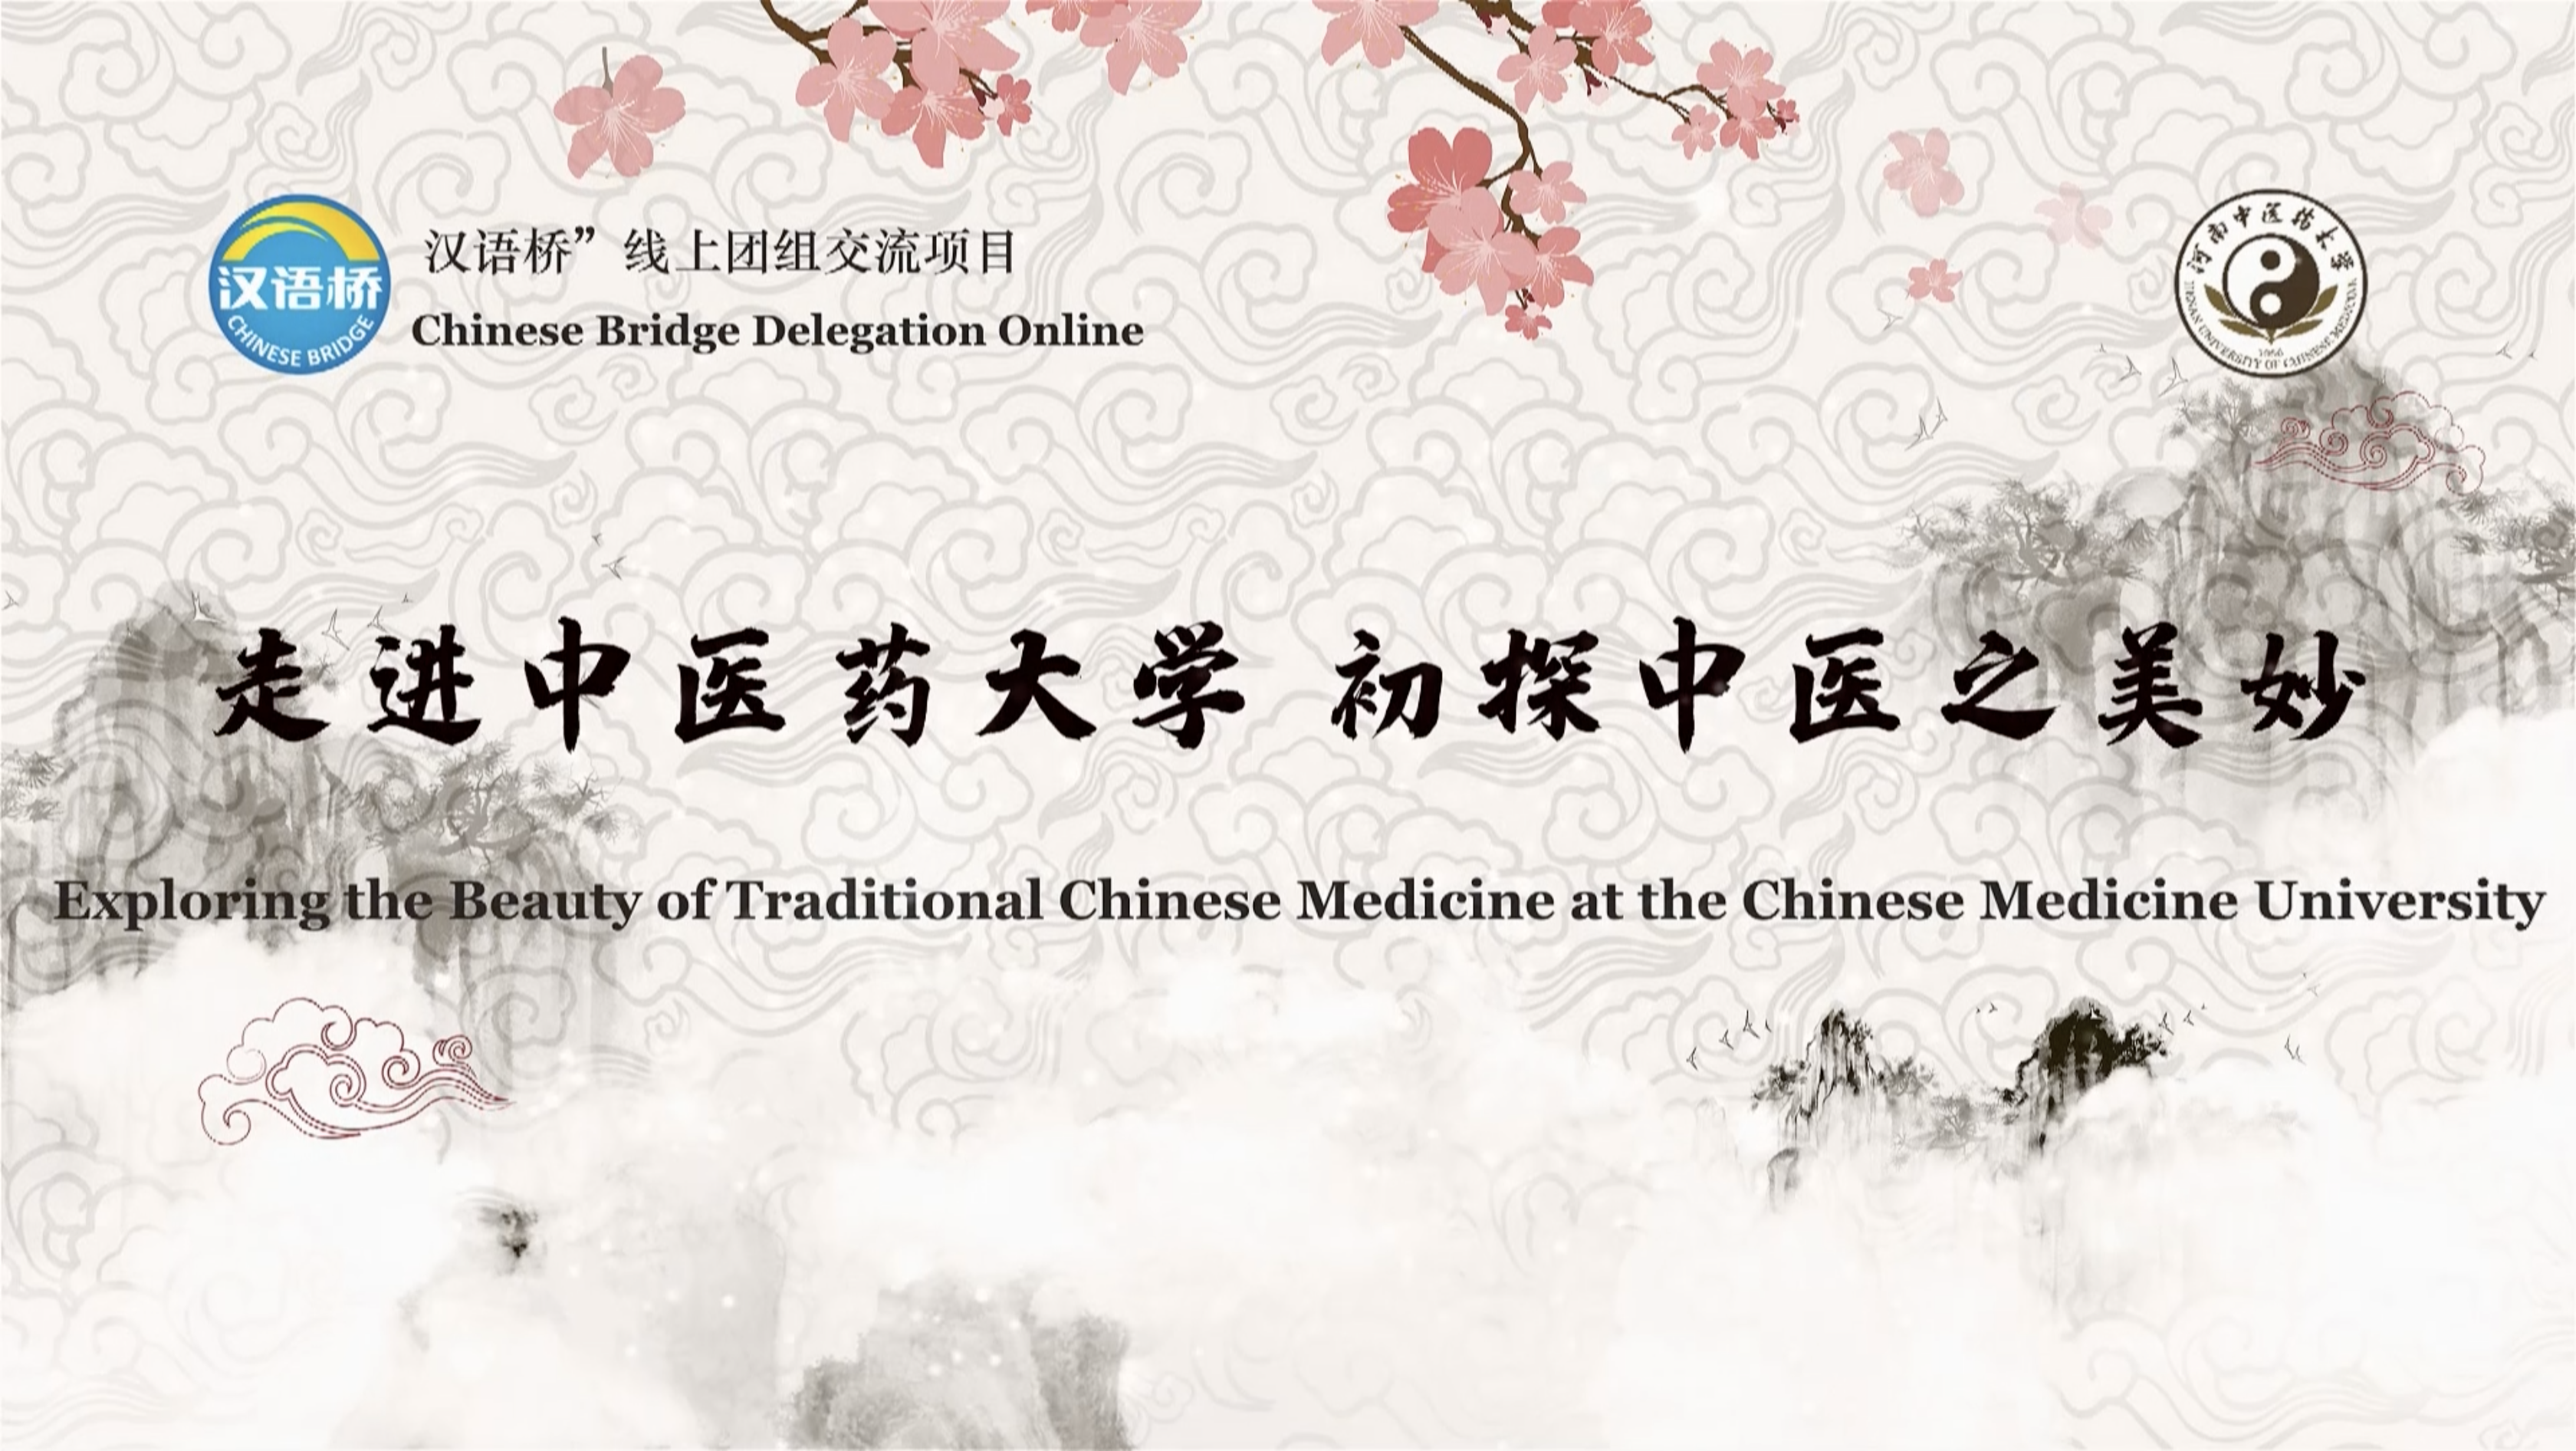 Exploring the Beauty of Traditional Chinese Medicine at the Chinese Medicine University